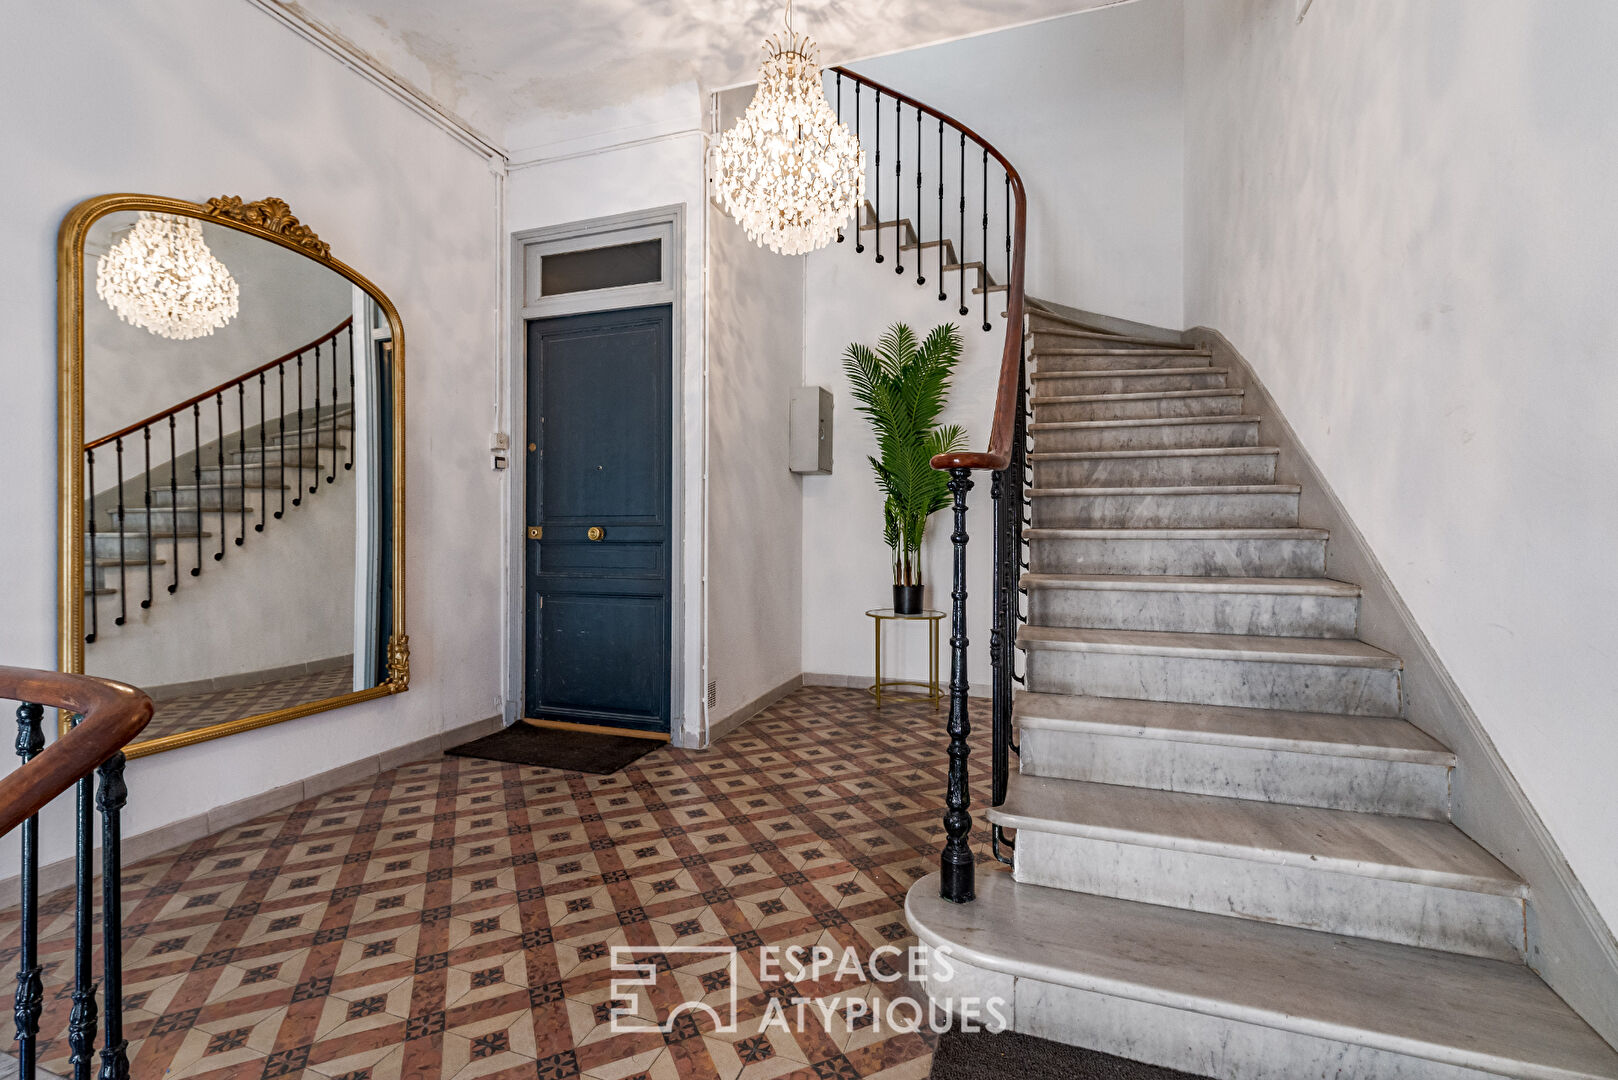 Apartment in a Bourgeois building in Cannes